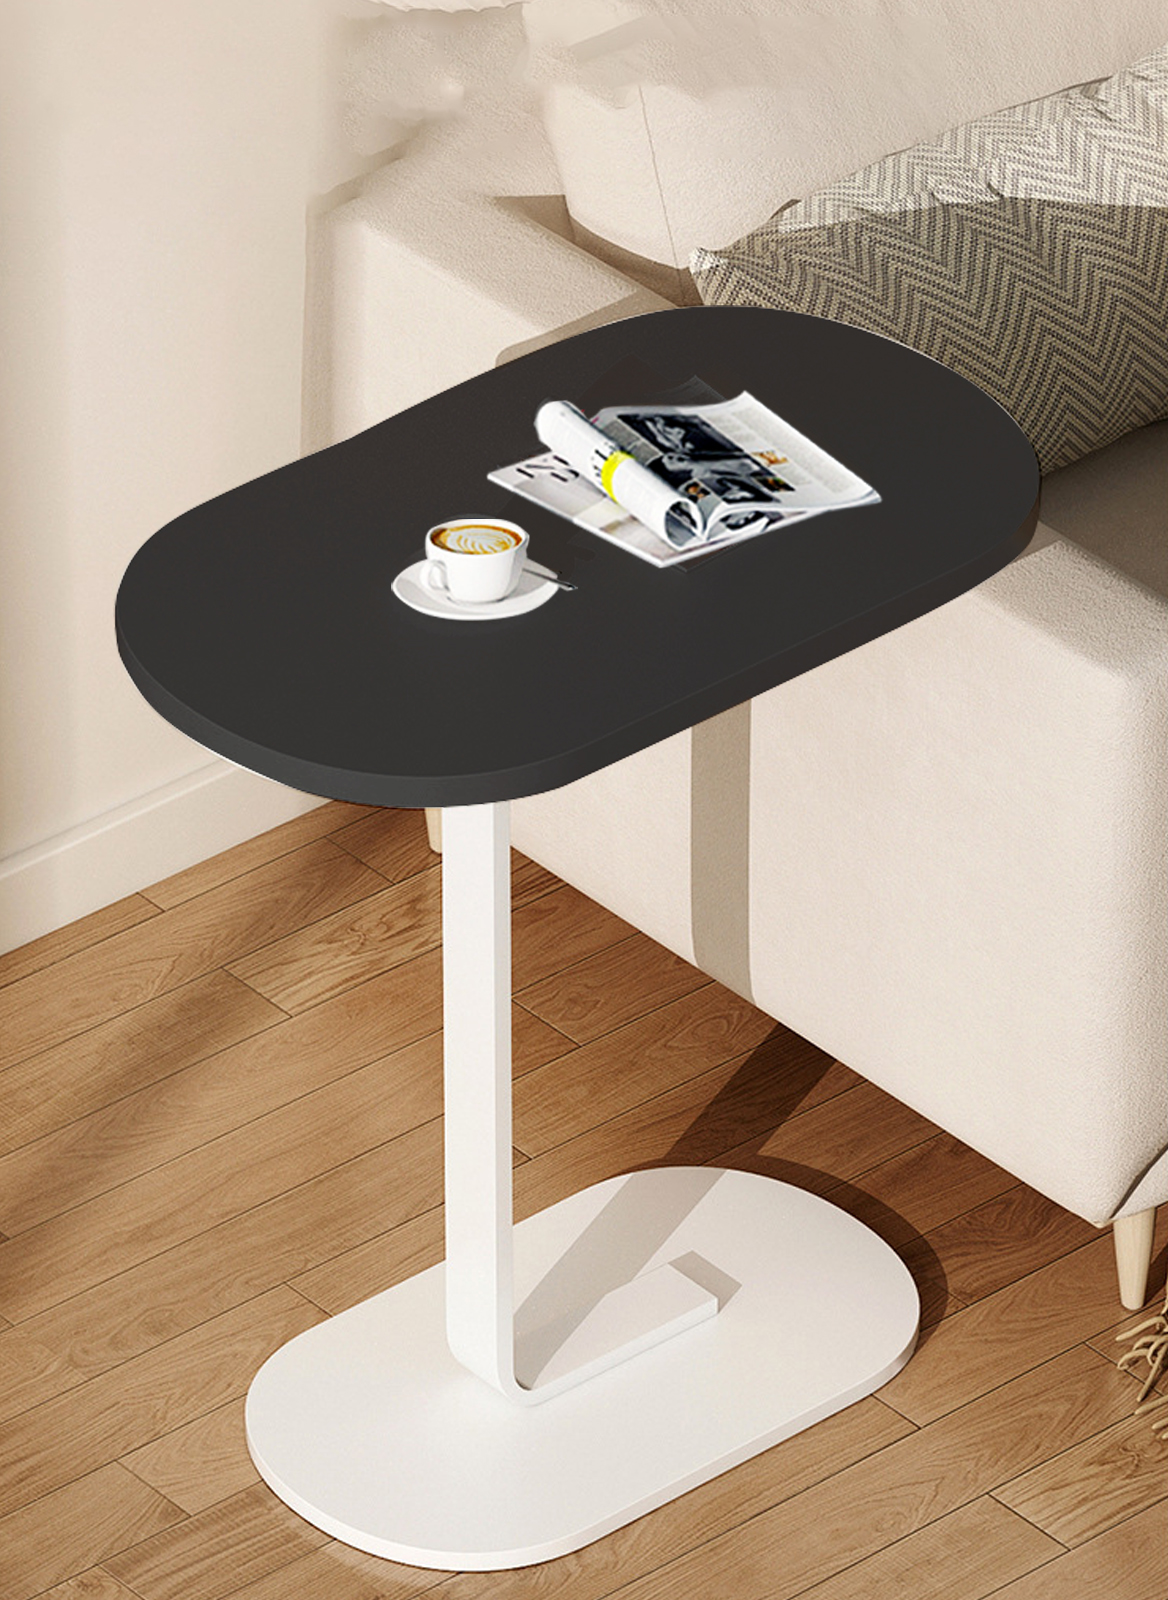 Simple Living Room Small Apartment C-Shaped Side Table Bedside Movable Coffee Table 45*30*60CM